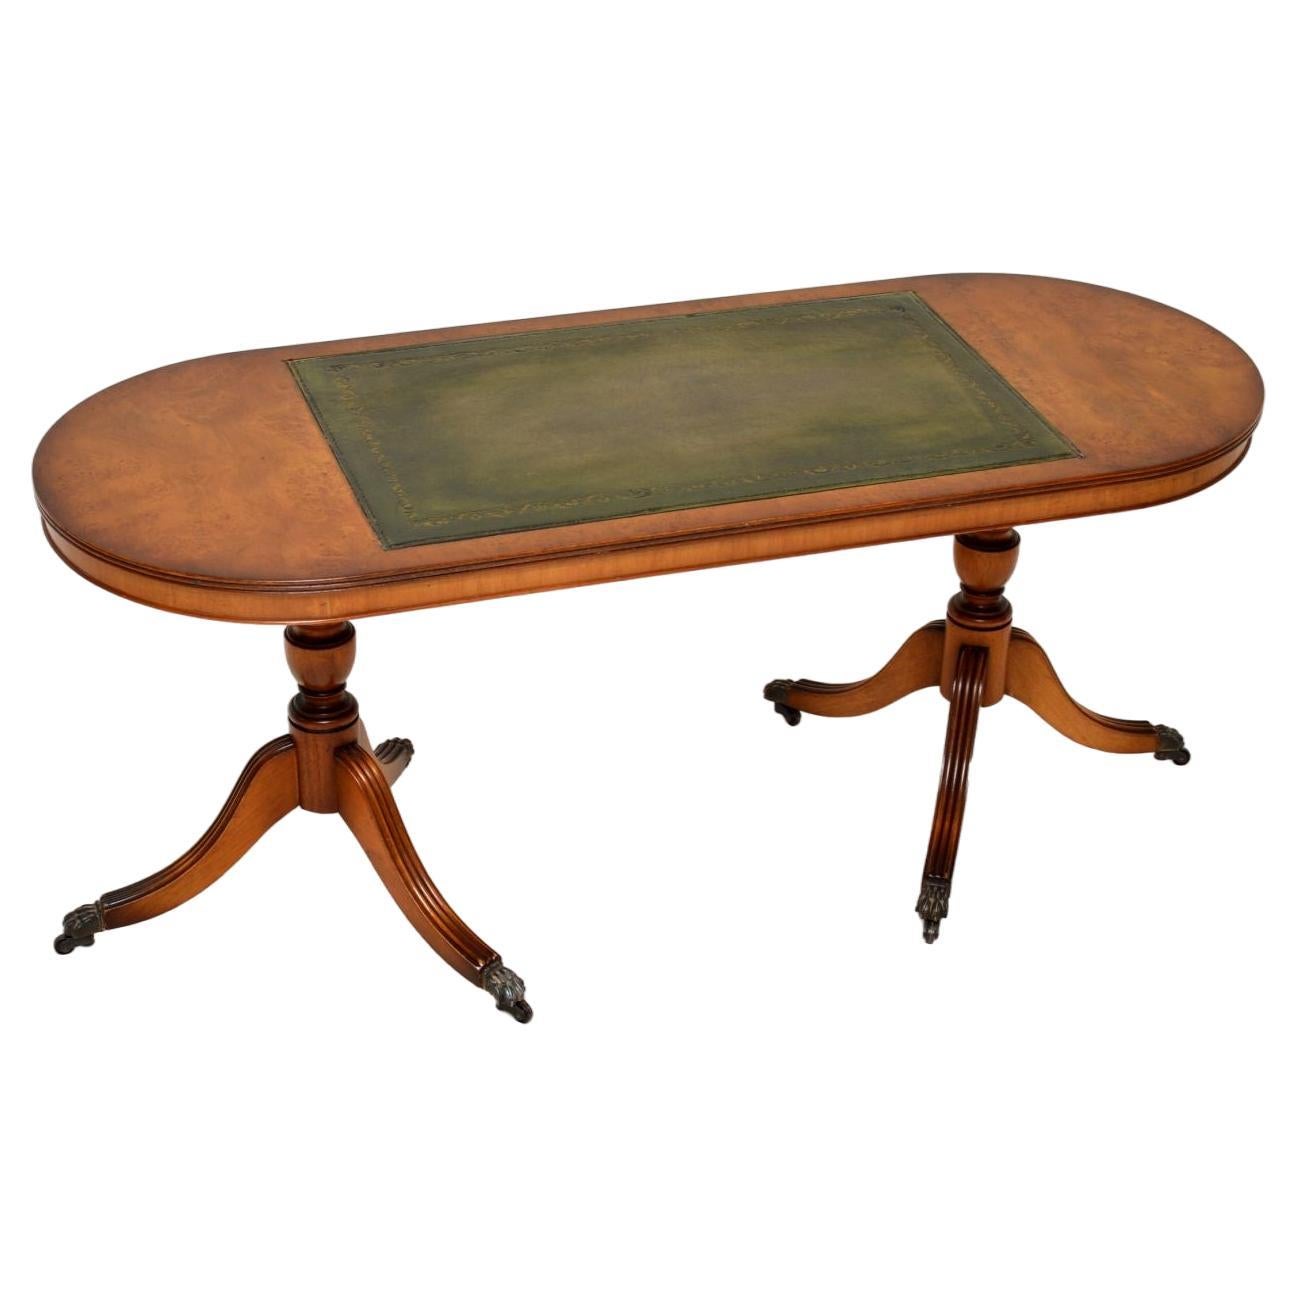 Antique Regency Style Walnut and Leather Coffee Table For Sale